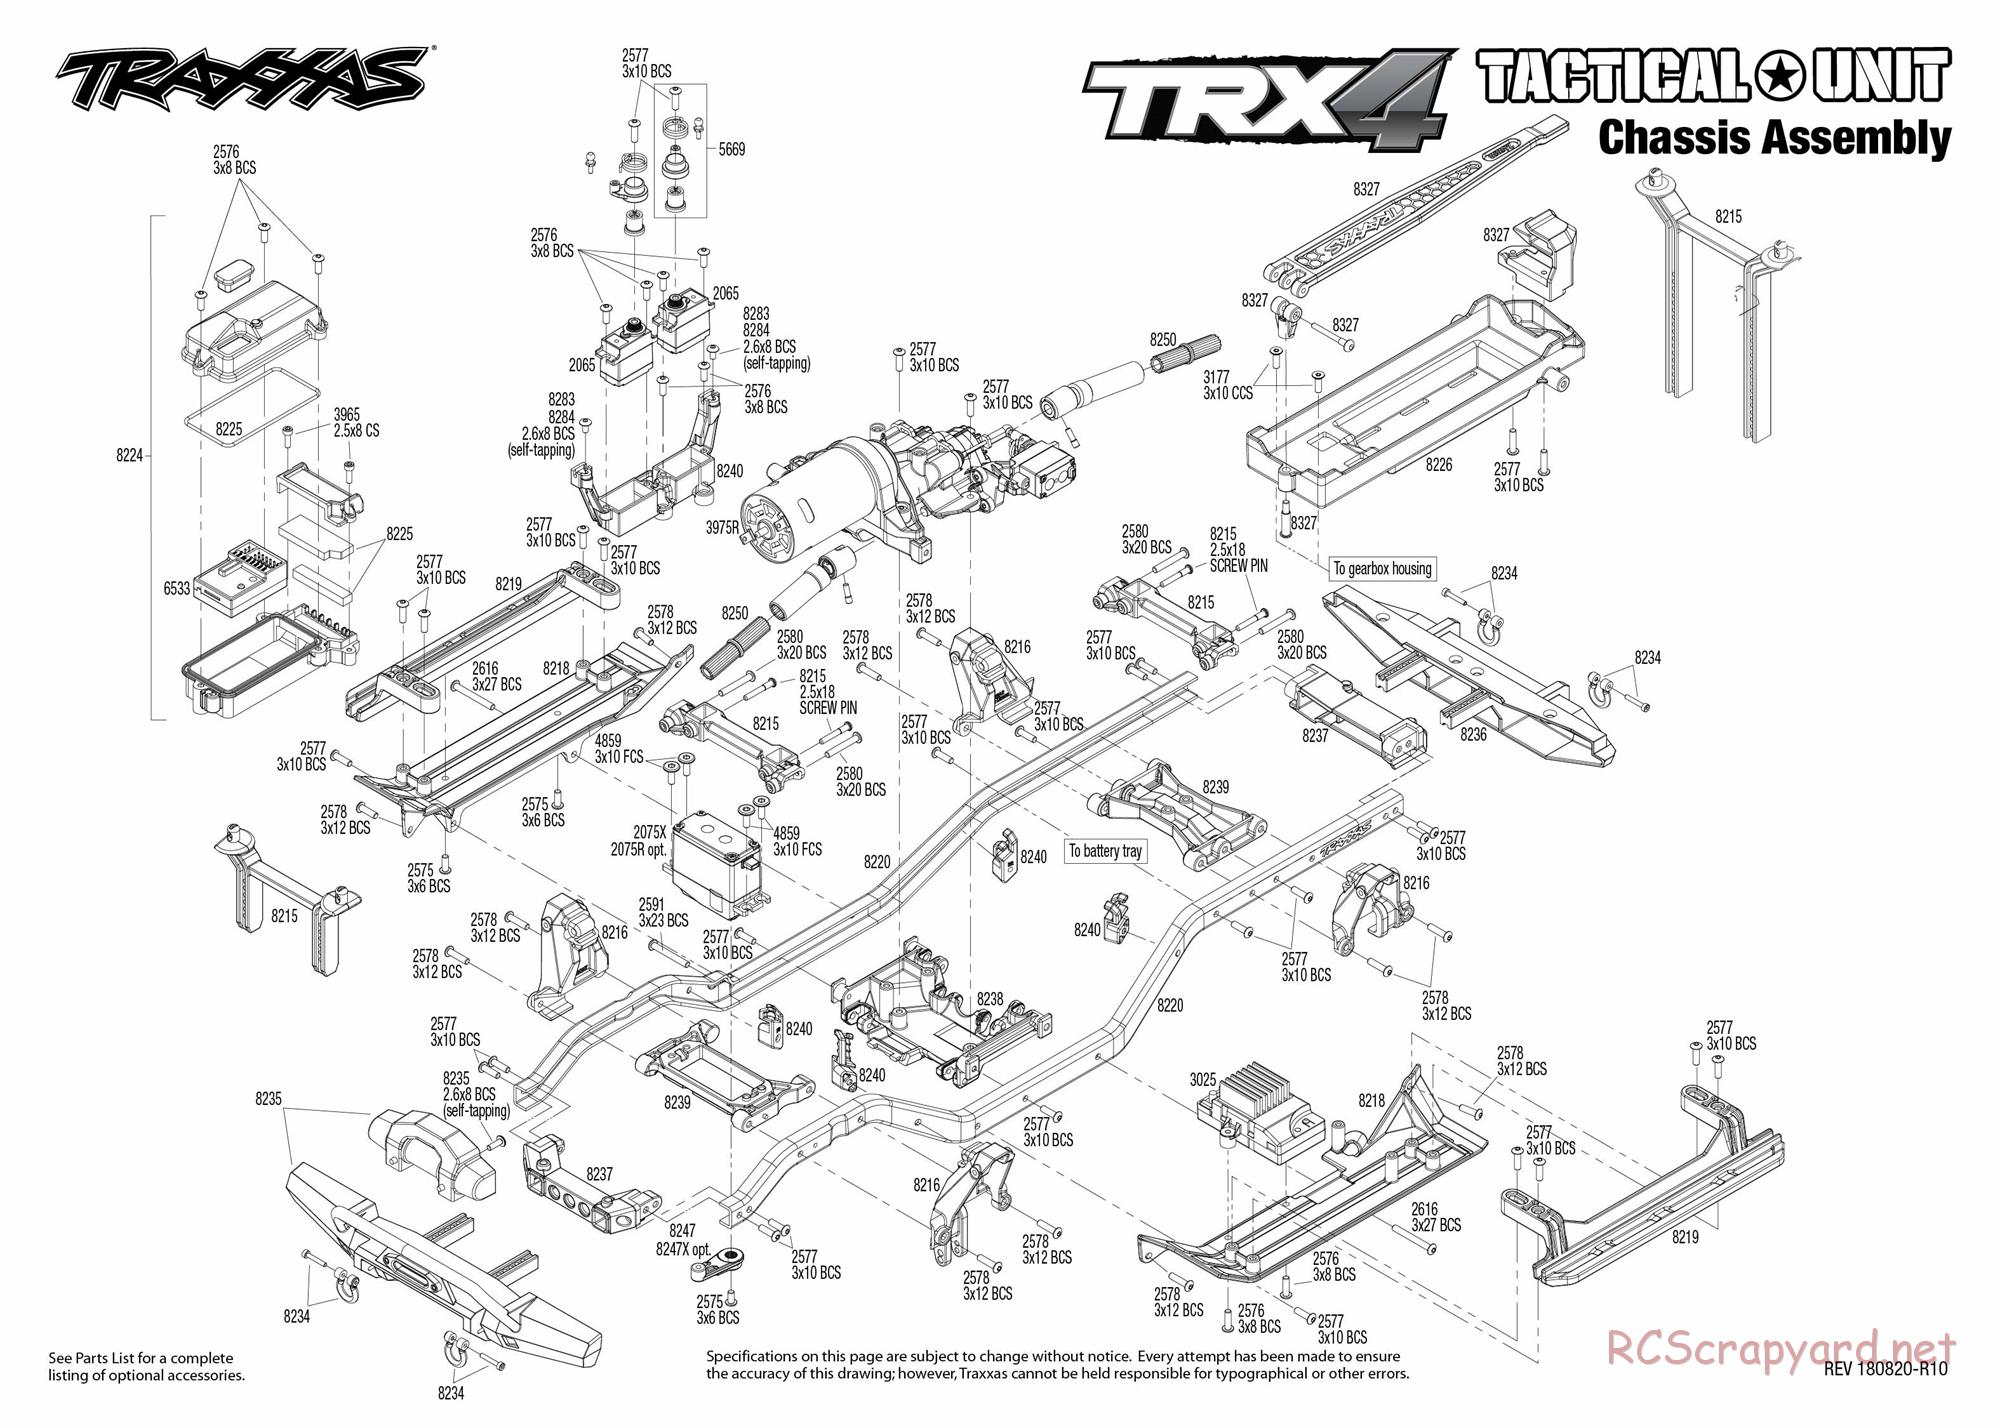 Traxxas - TRX-4 Tactical Unit (2018) - Exploded Views - Page 2